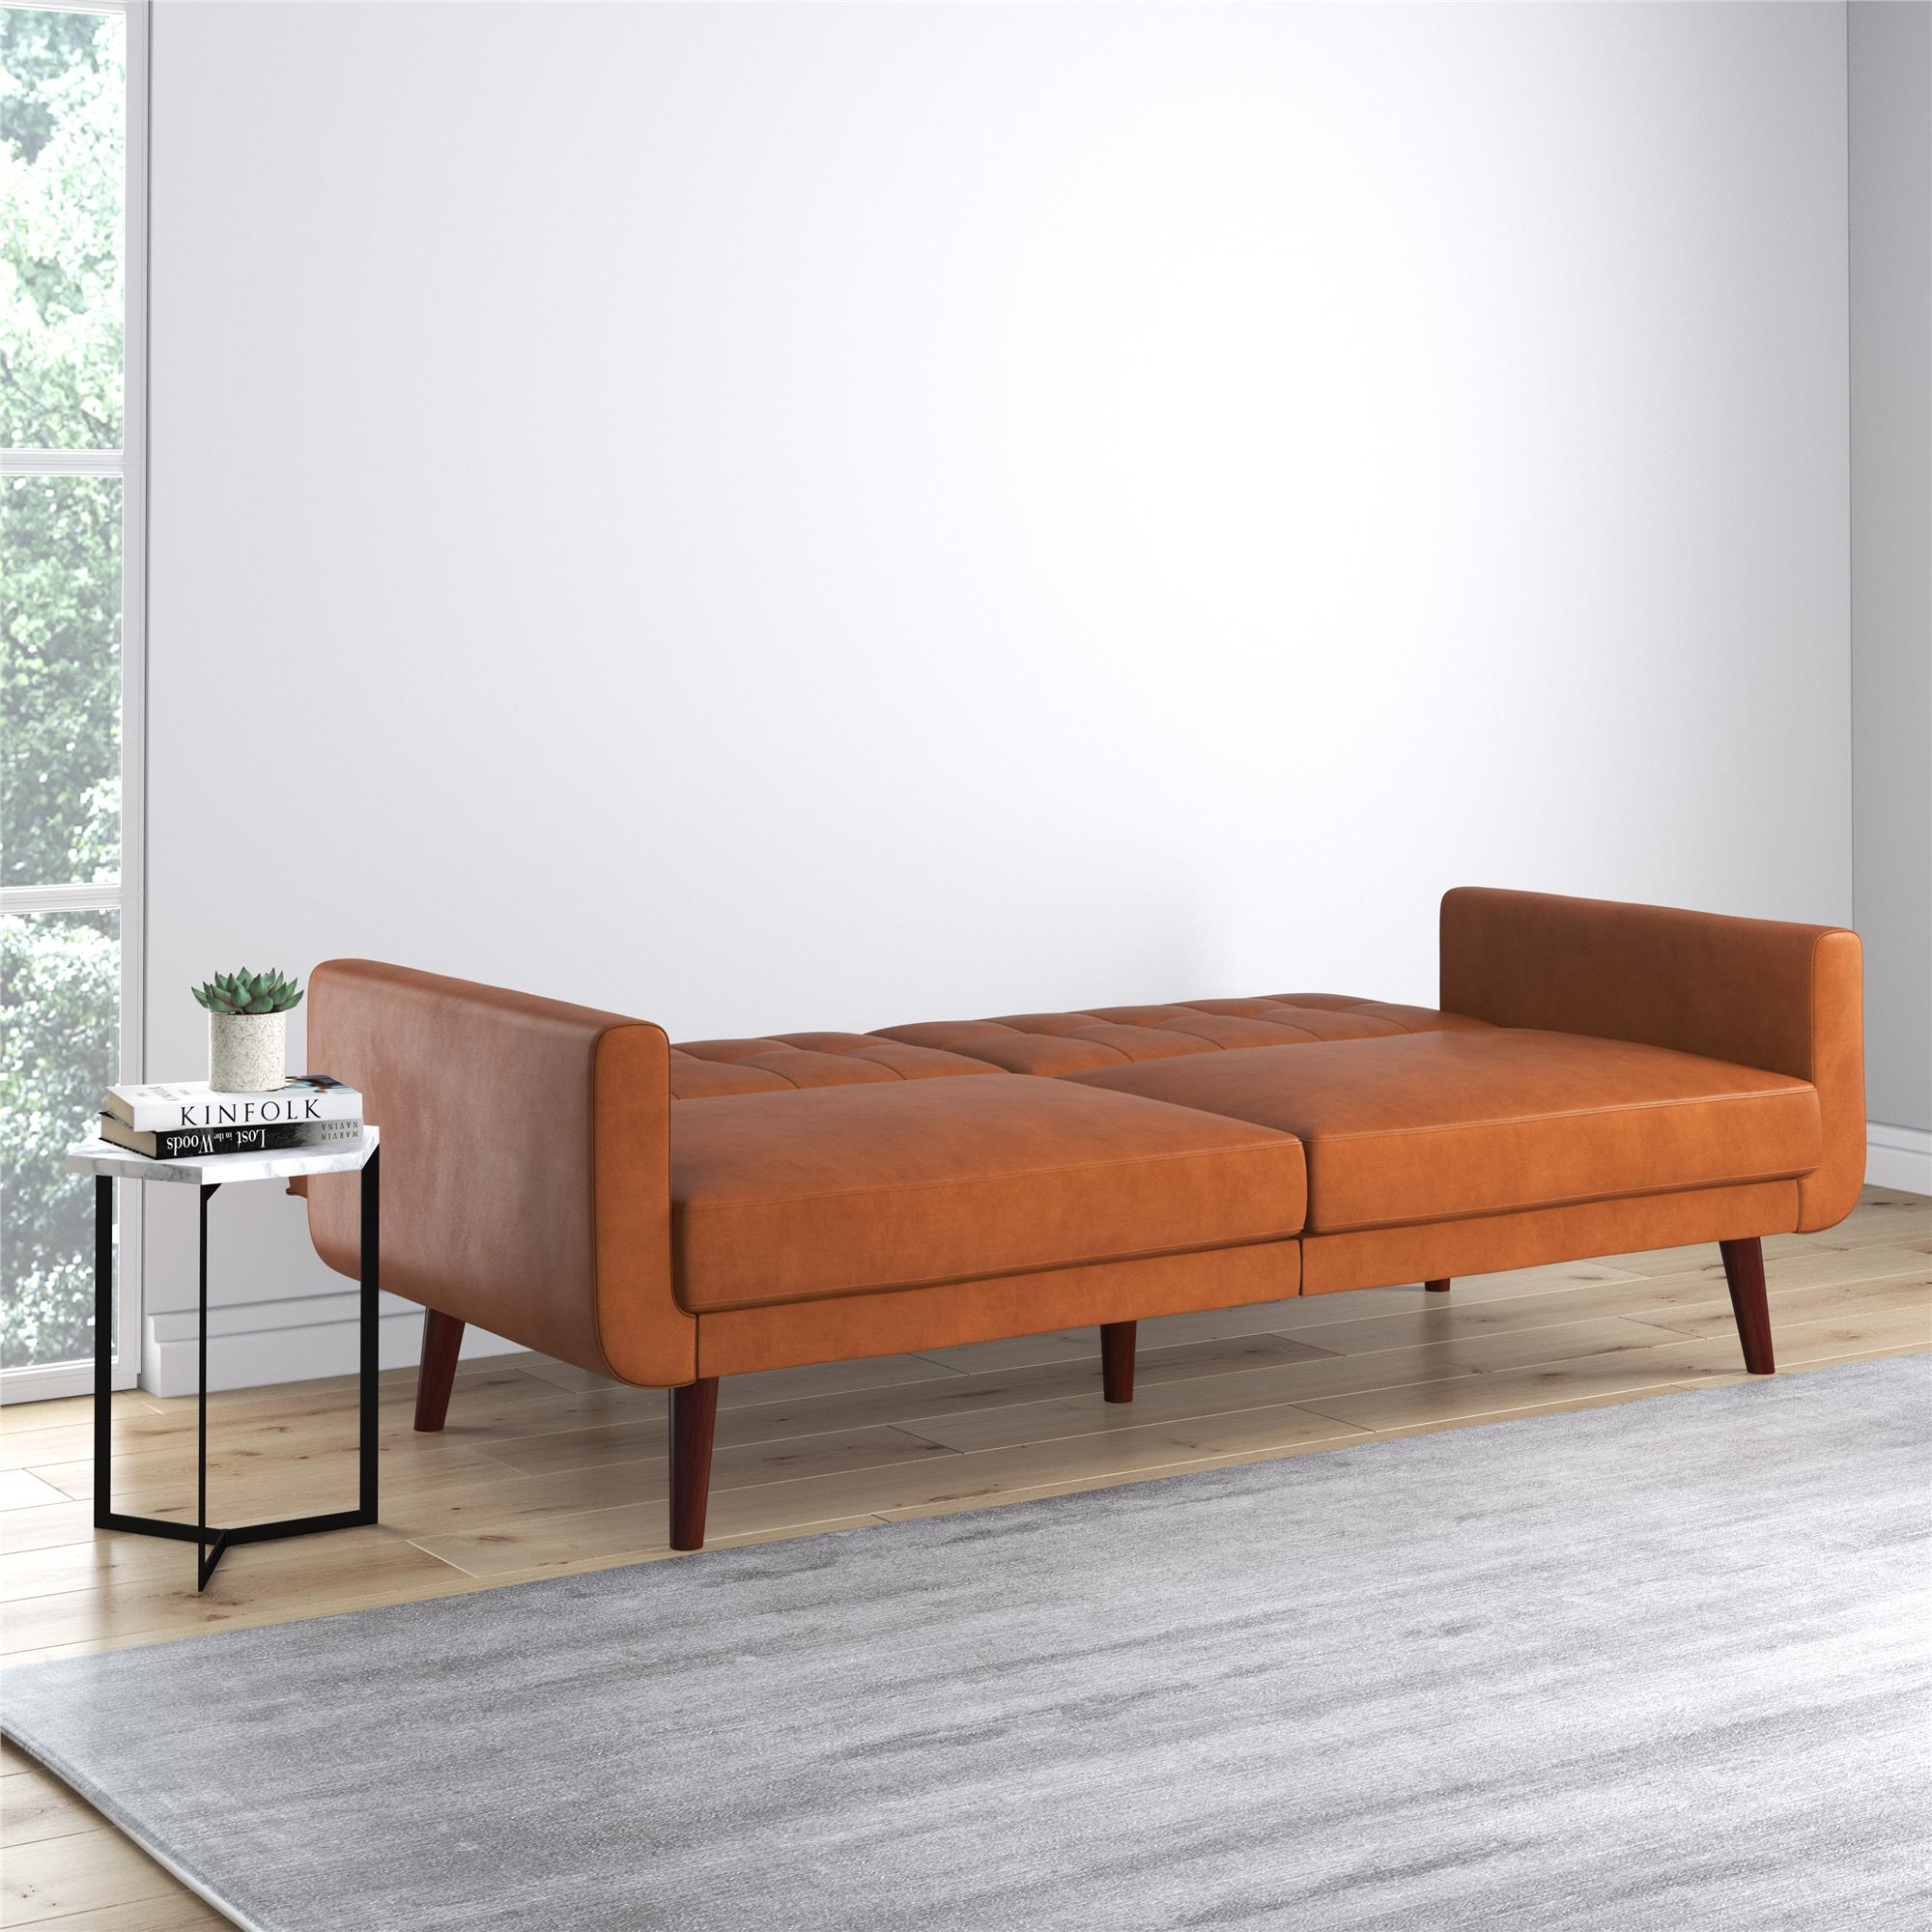 Better Homes & Gardens Nola Modern Futon, Camel Faux Leather - image 2 of 17